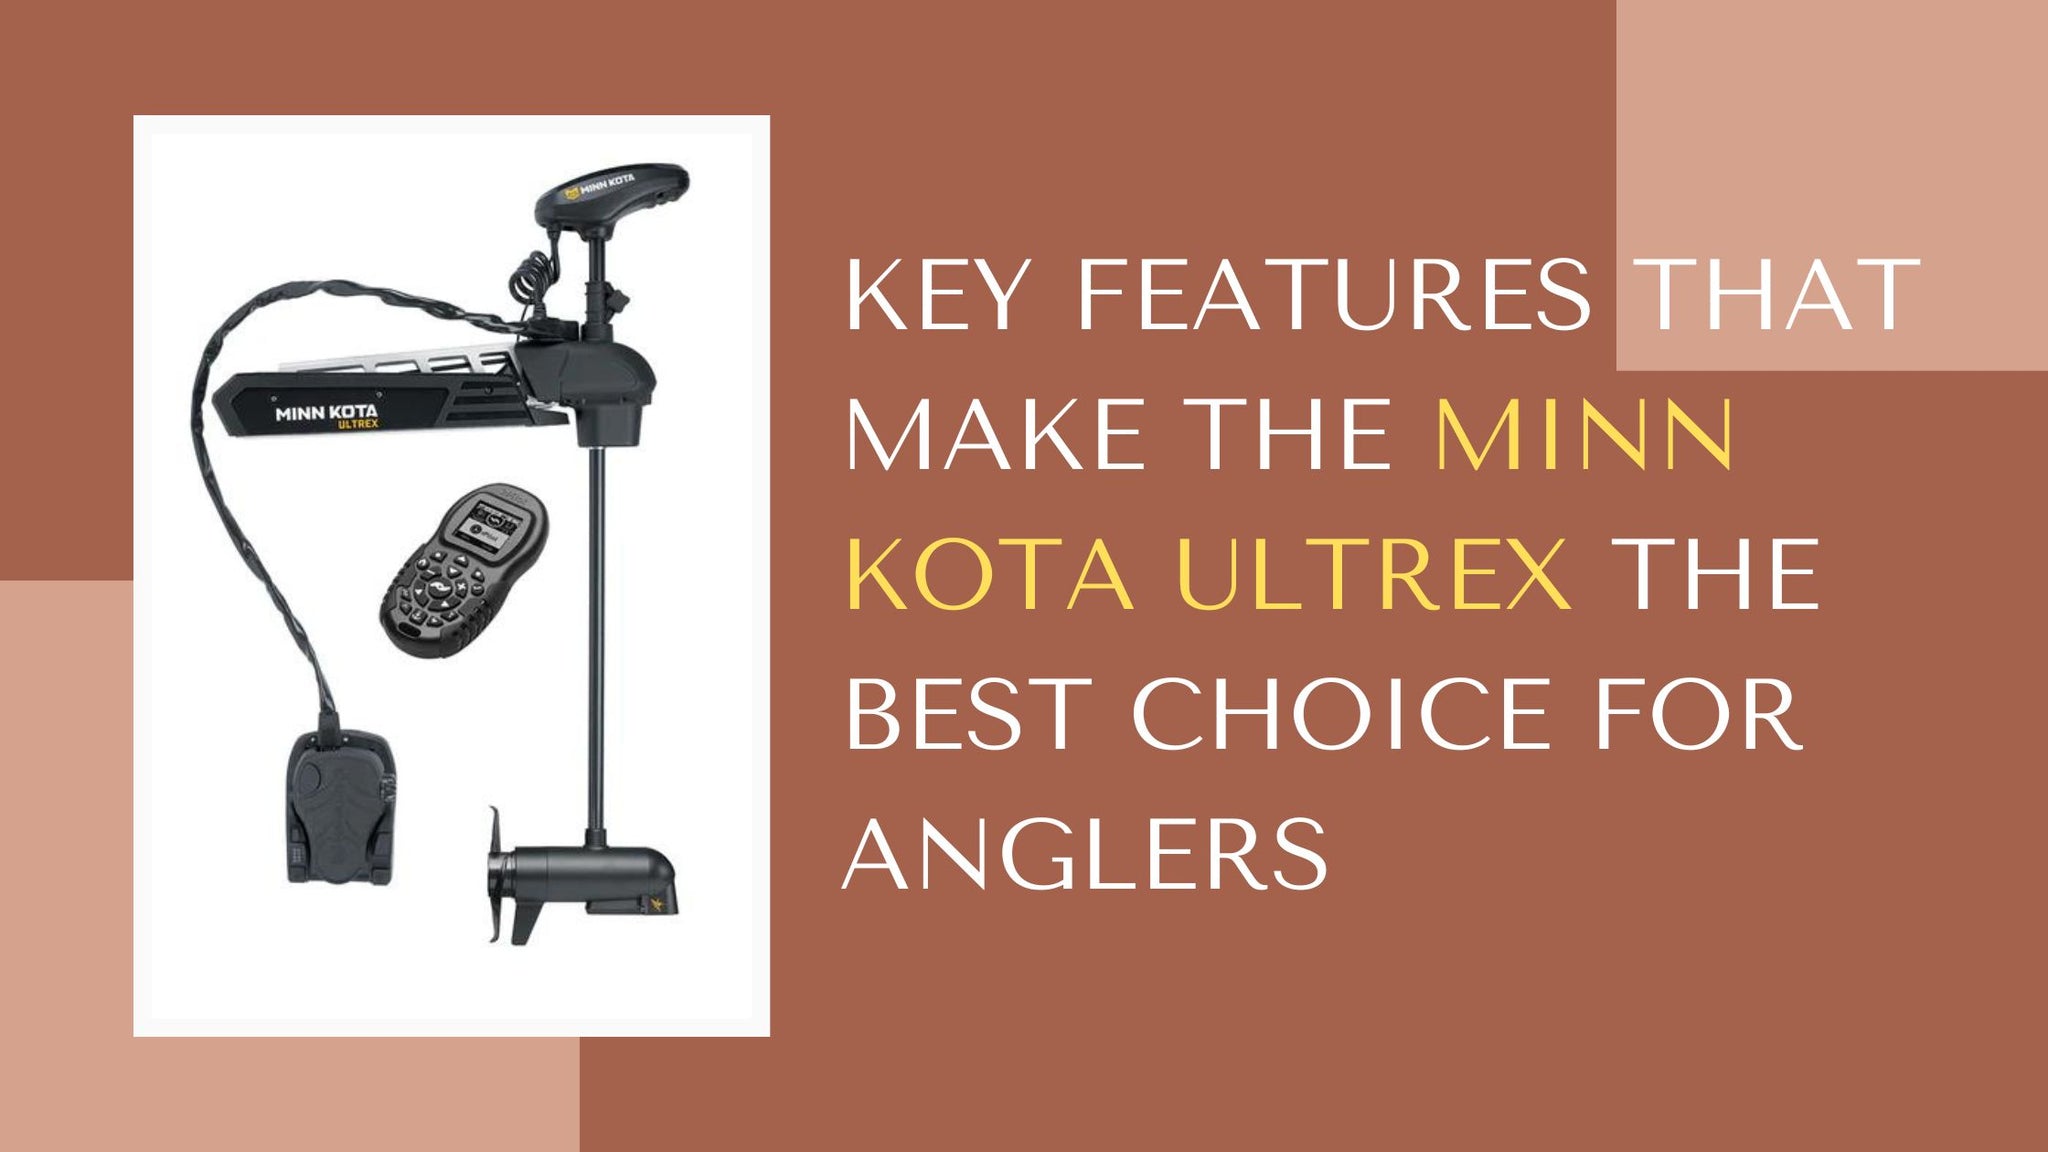 Key Features That Make the Minn Kota Ultrex the Best Choice for Anglers